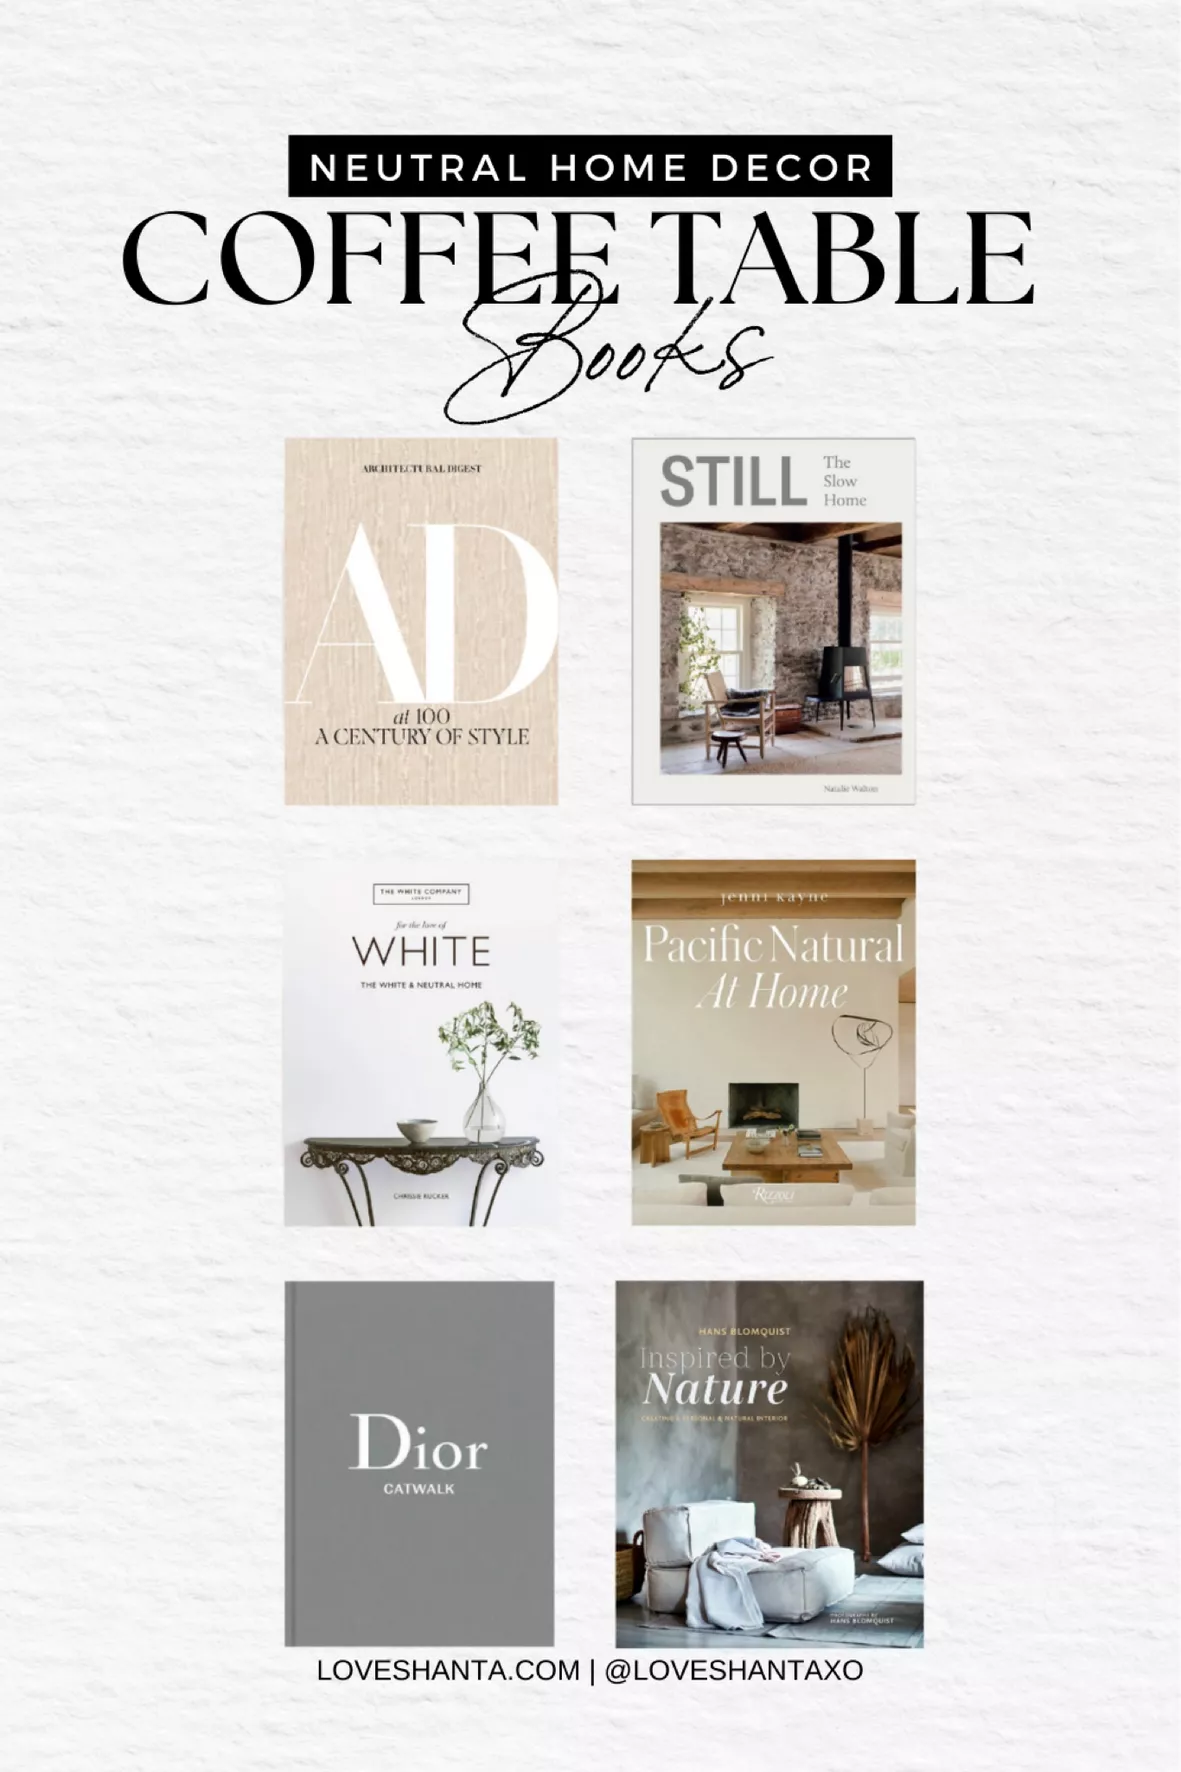 Architectural Digest A Century of Style Coffee Table Book